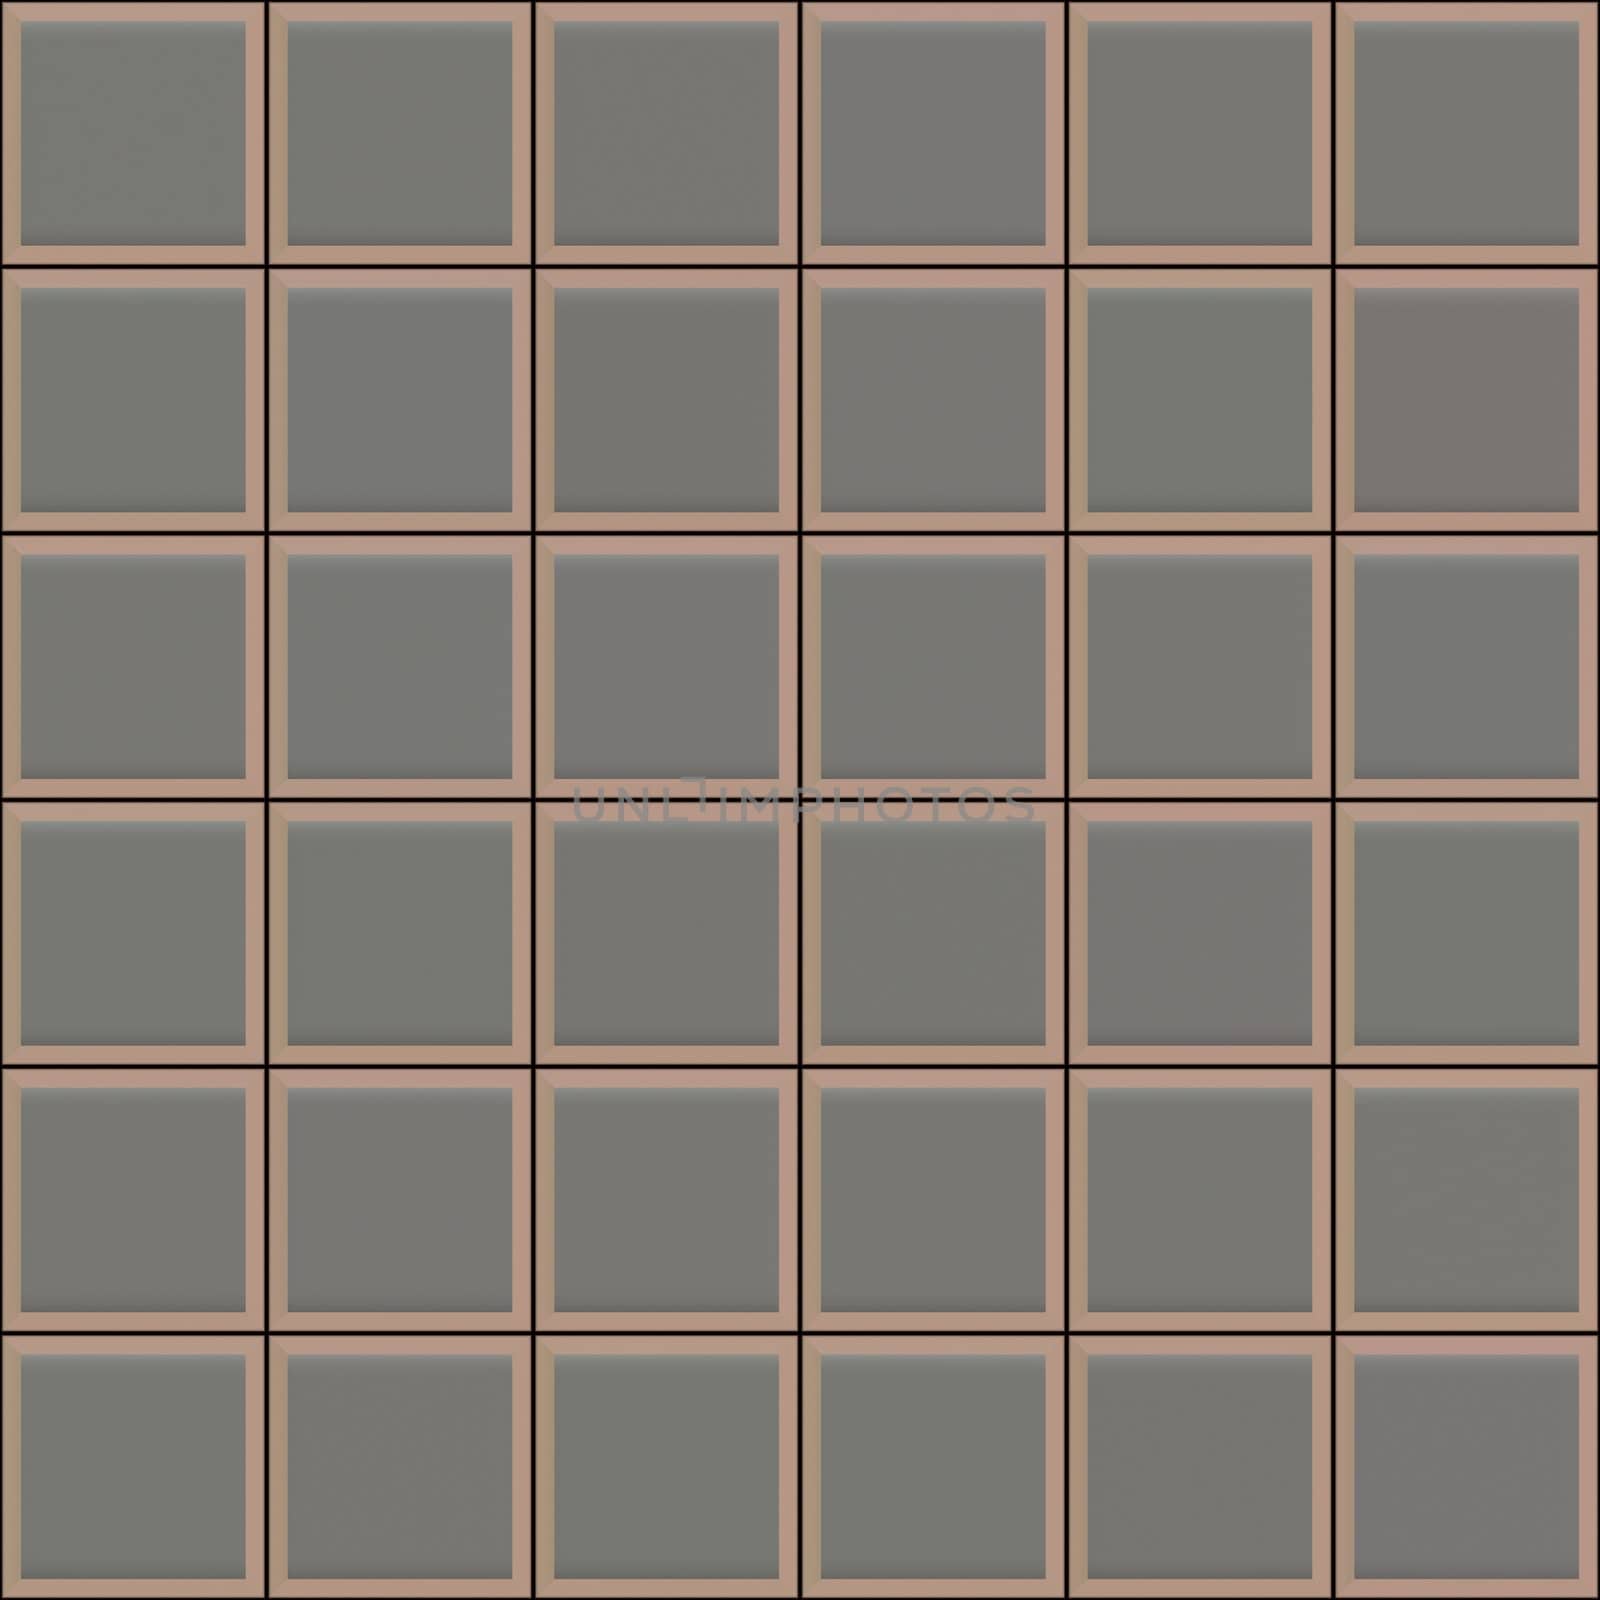 grey square tiles pattern by weknow